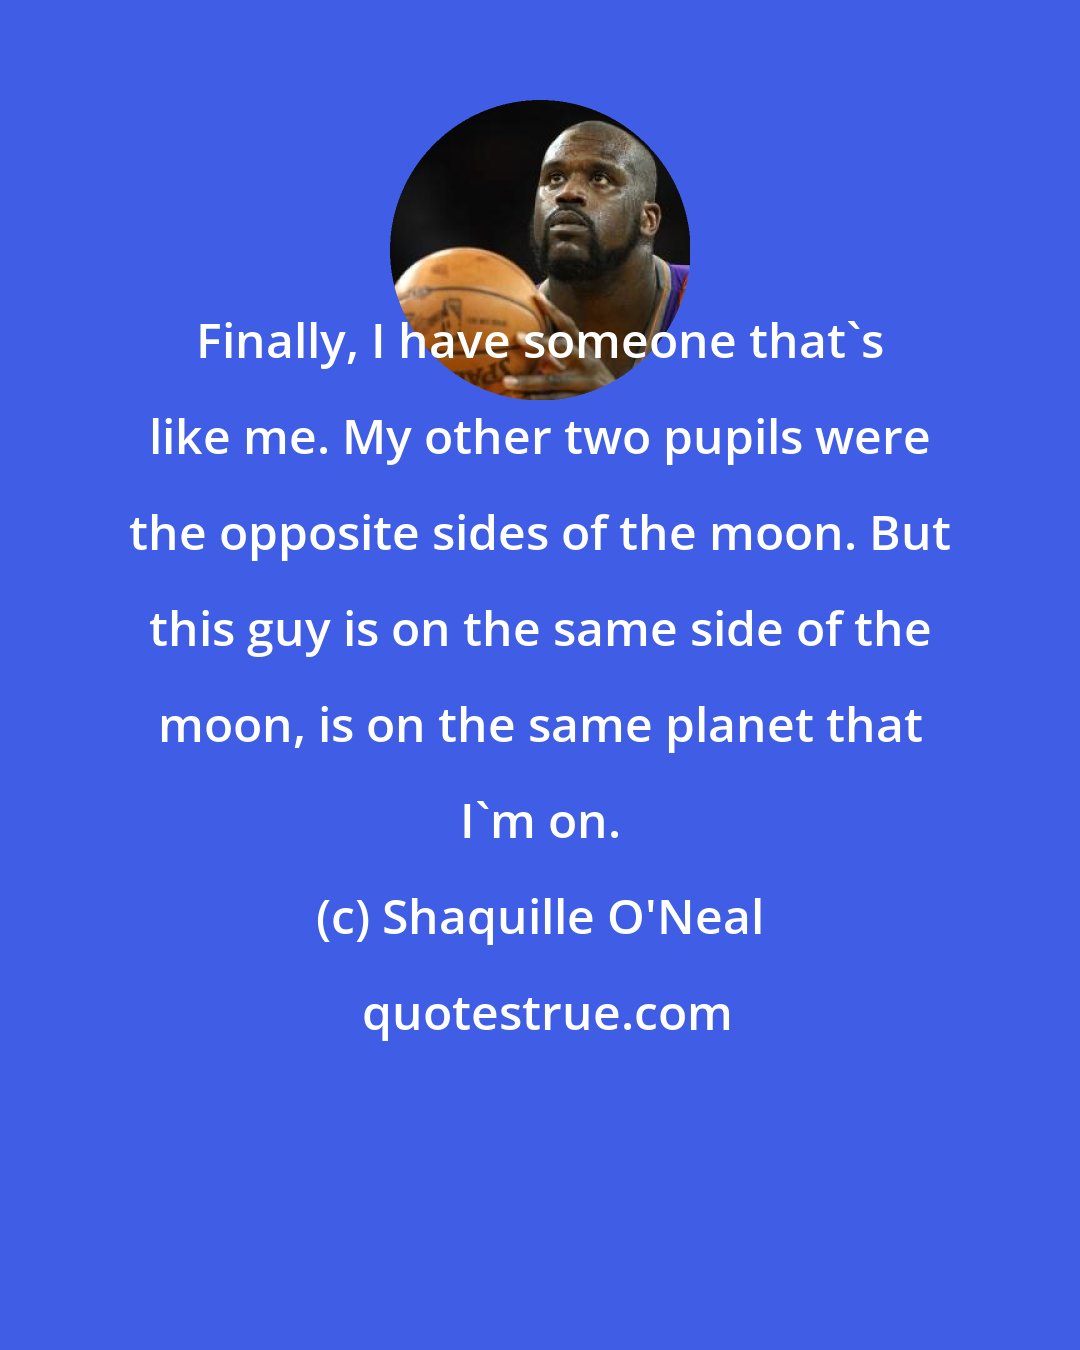 Shaquille O'Neal: Finally, I have someone that's like me. My other two pupils were the opposite sides of the moon. But this guy is on the same side of the moon, is on the same planet that I'm on.